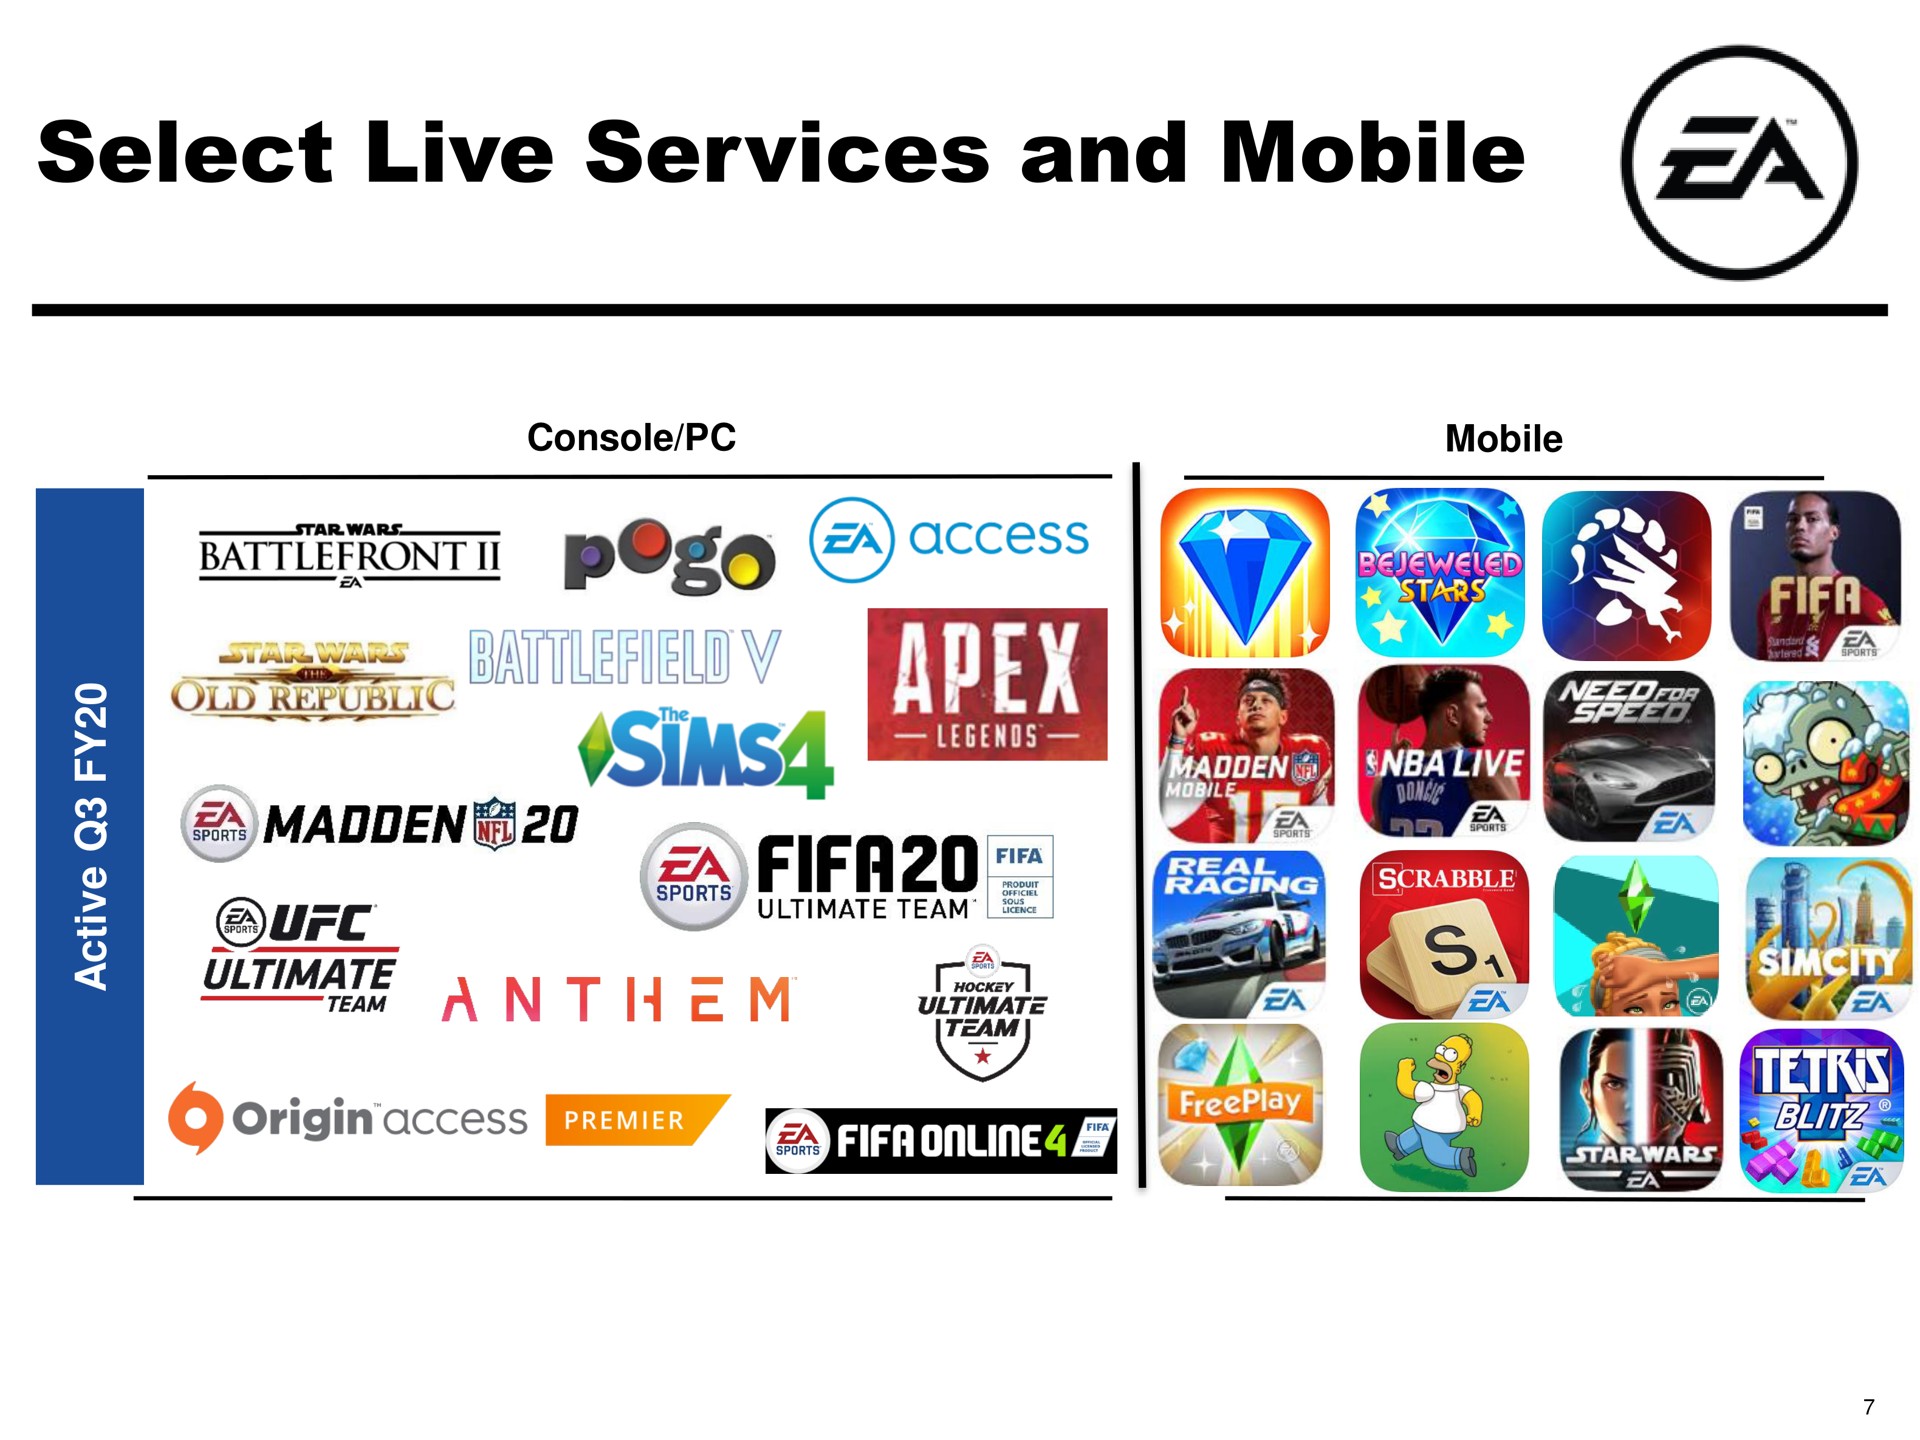 select live services and mobile madden a | Electronic Arts